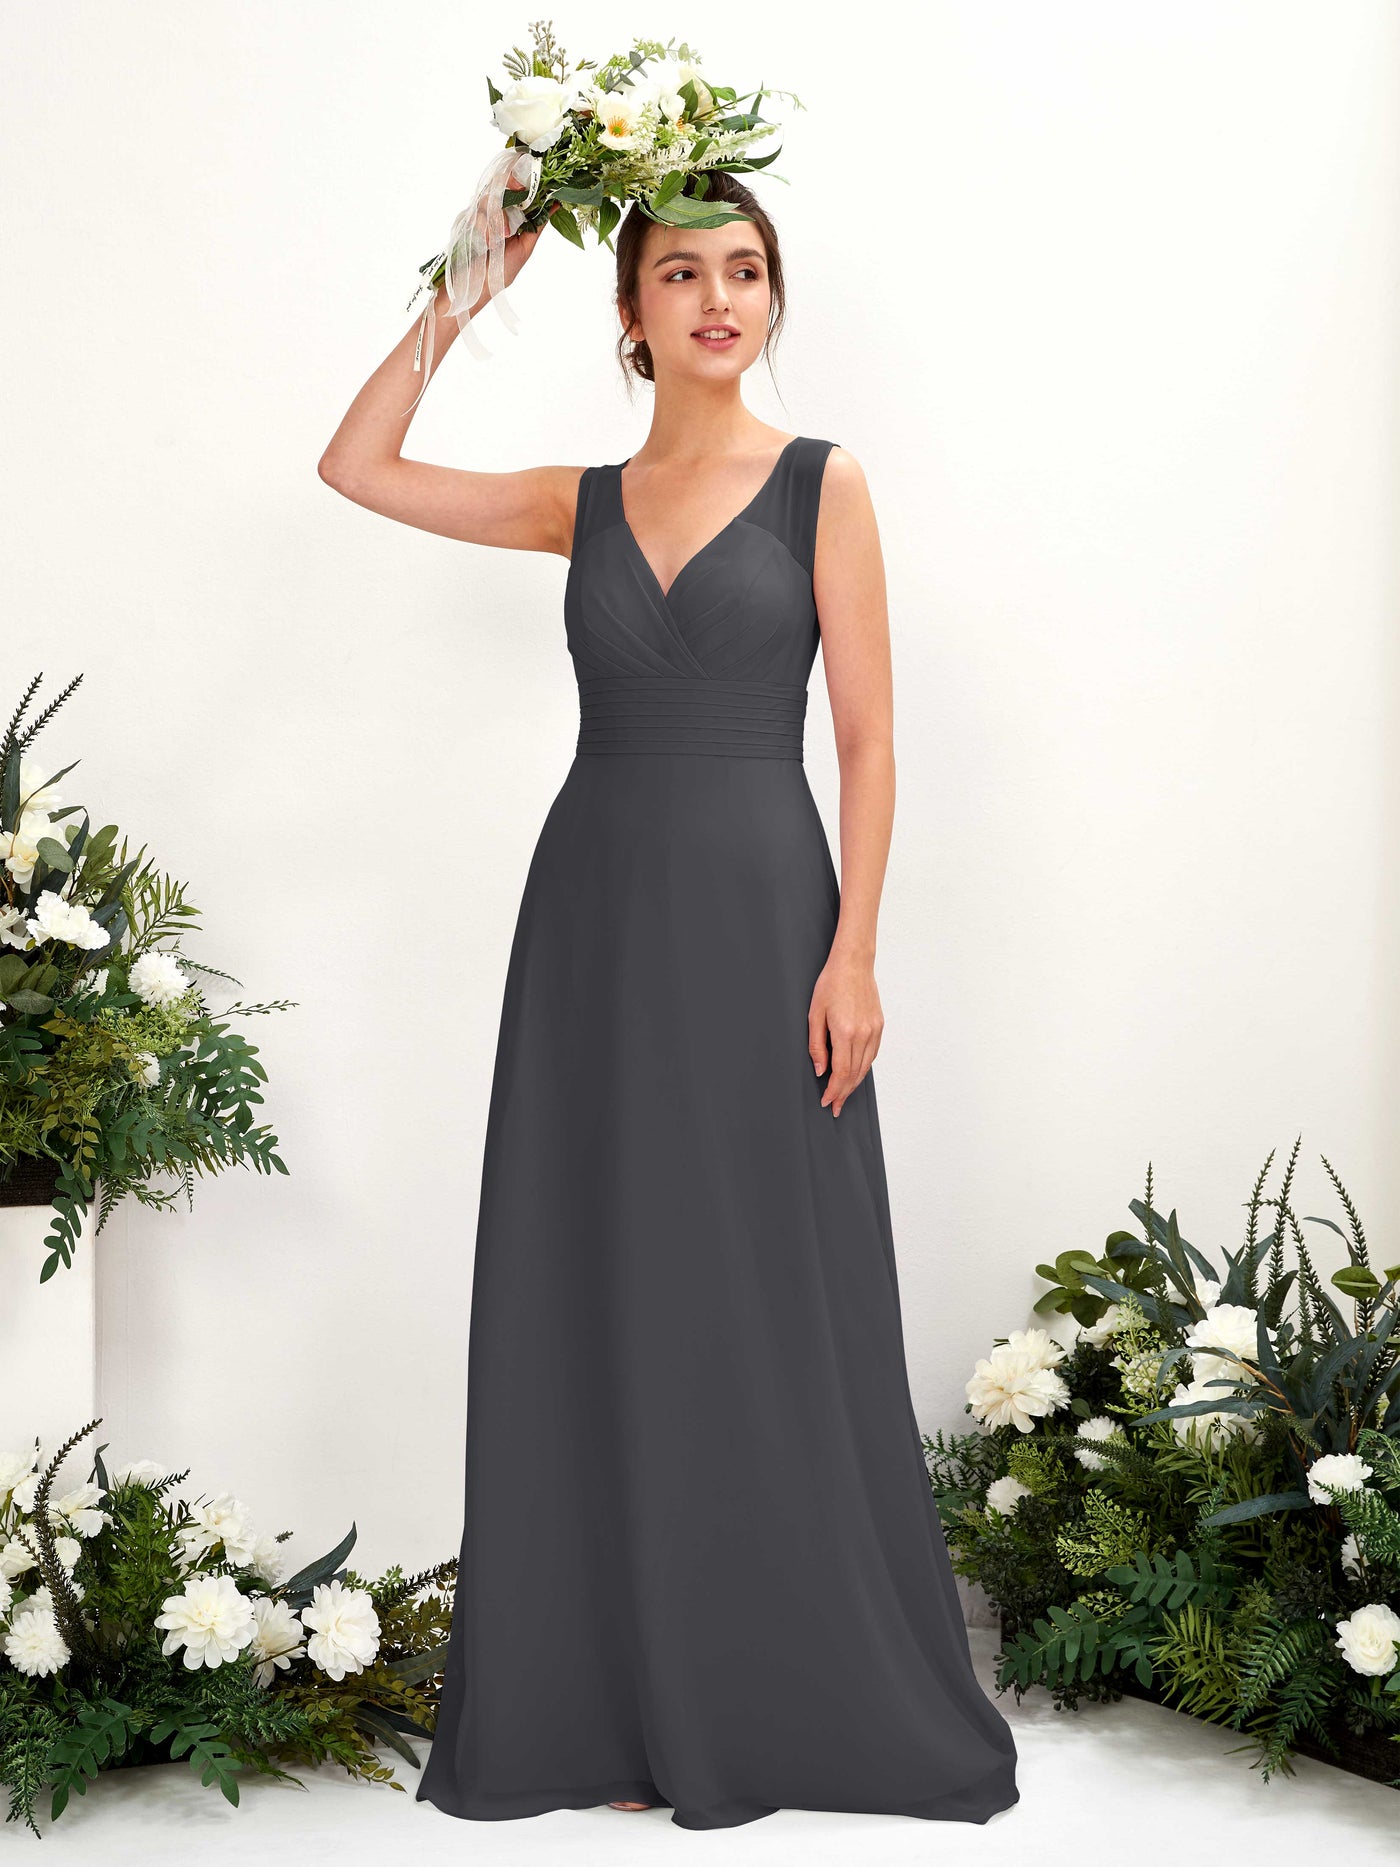 Pewter Bridesmaid Dresses Bridesmaid Dress A-line Chiffon Straps Full Length Sleeveless Wedding Party Dress (81220938)#color_pewter